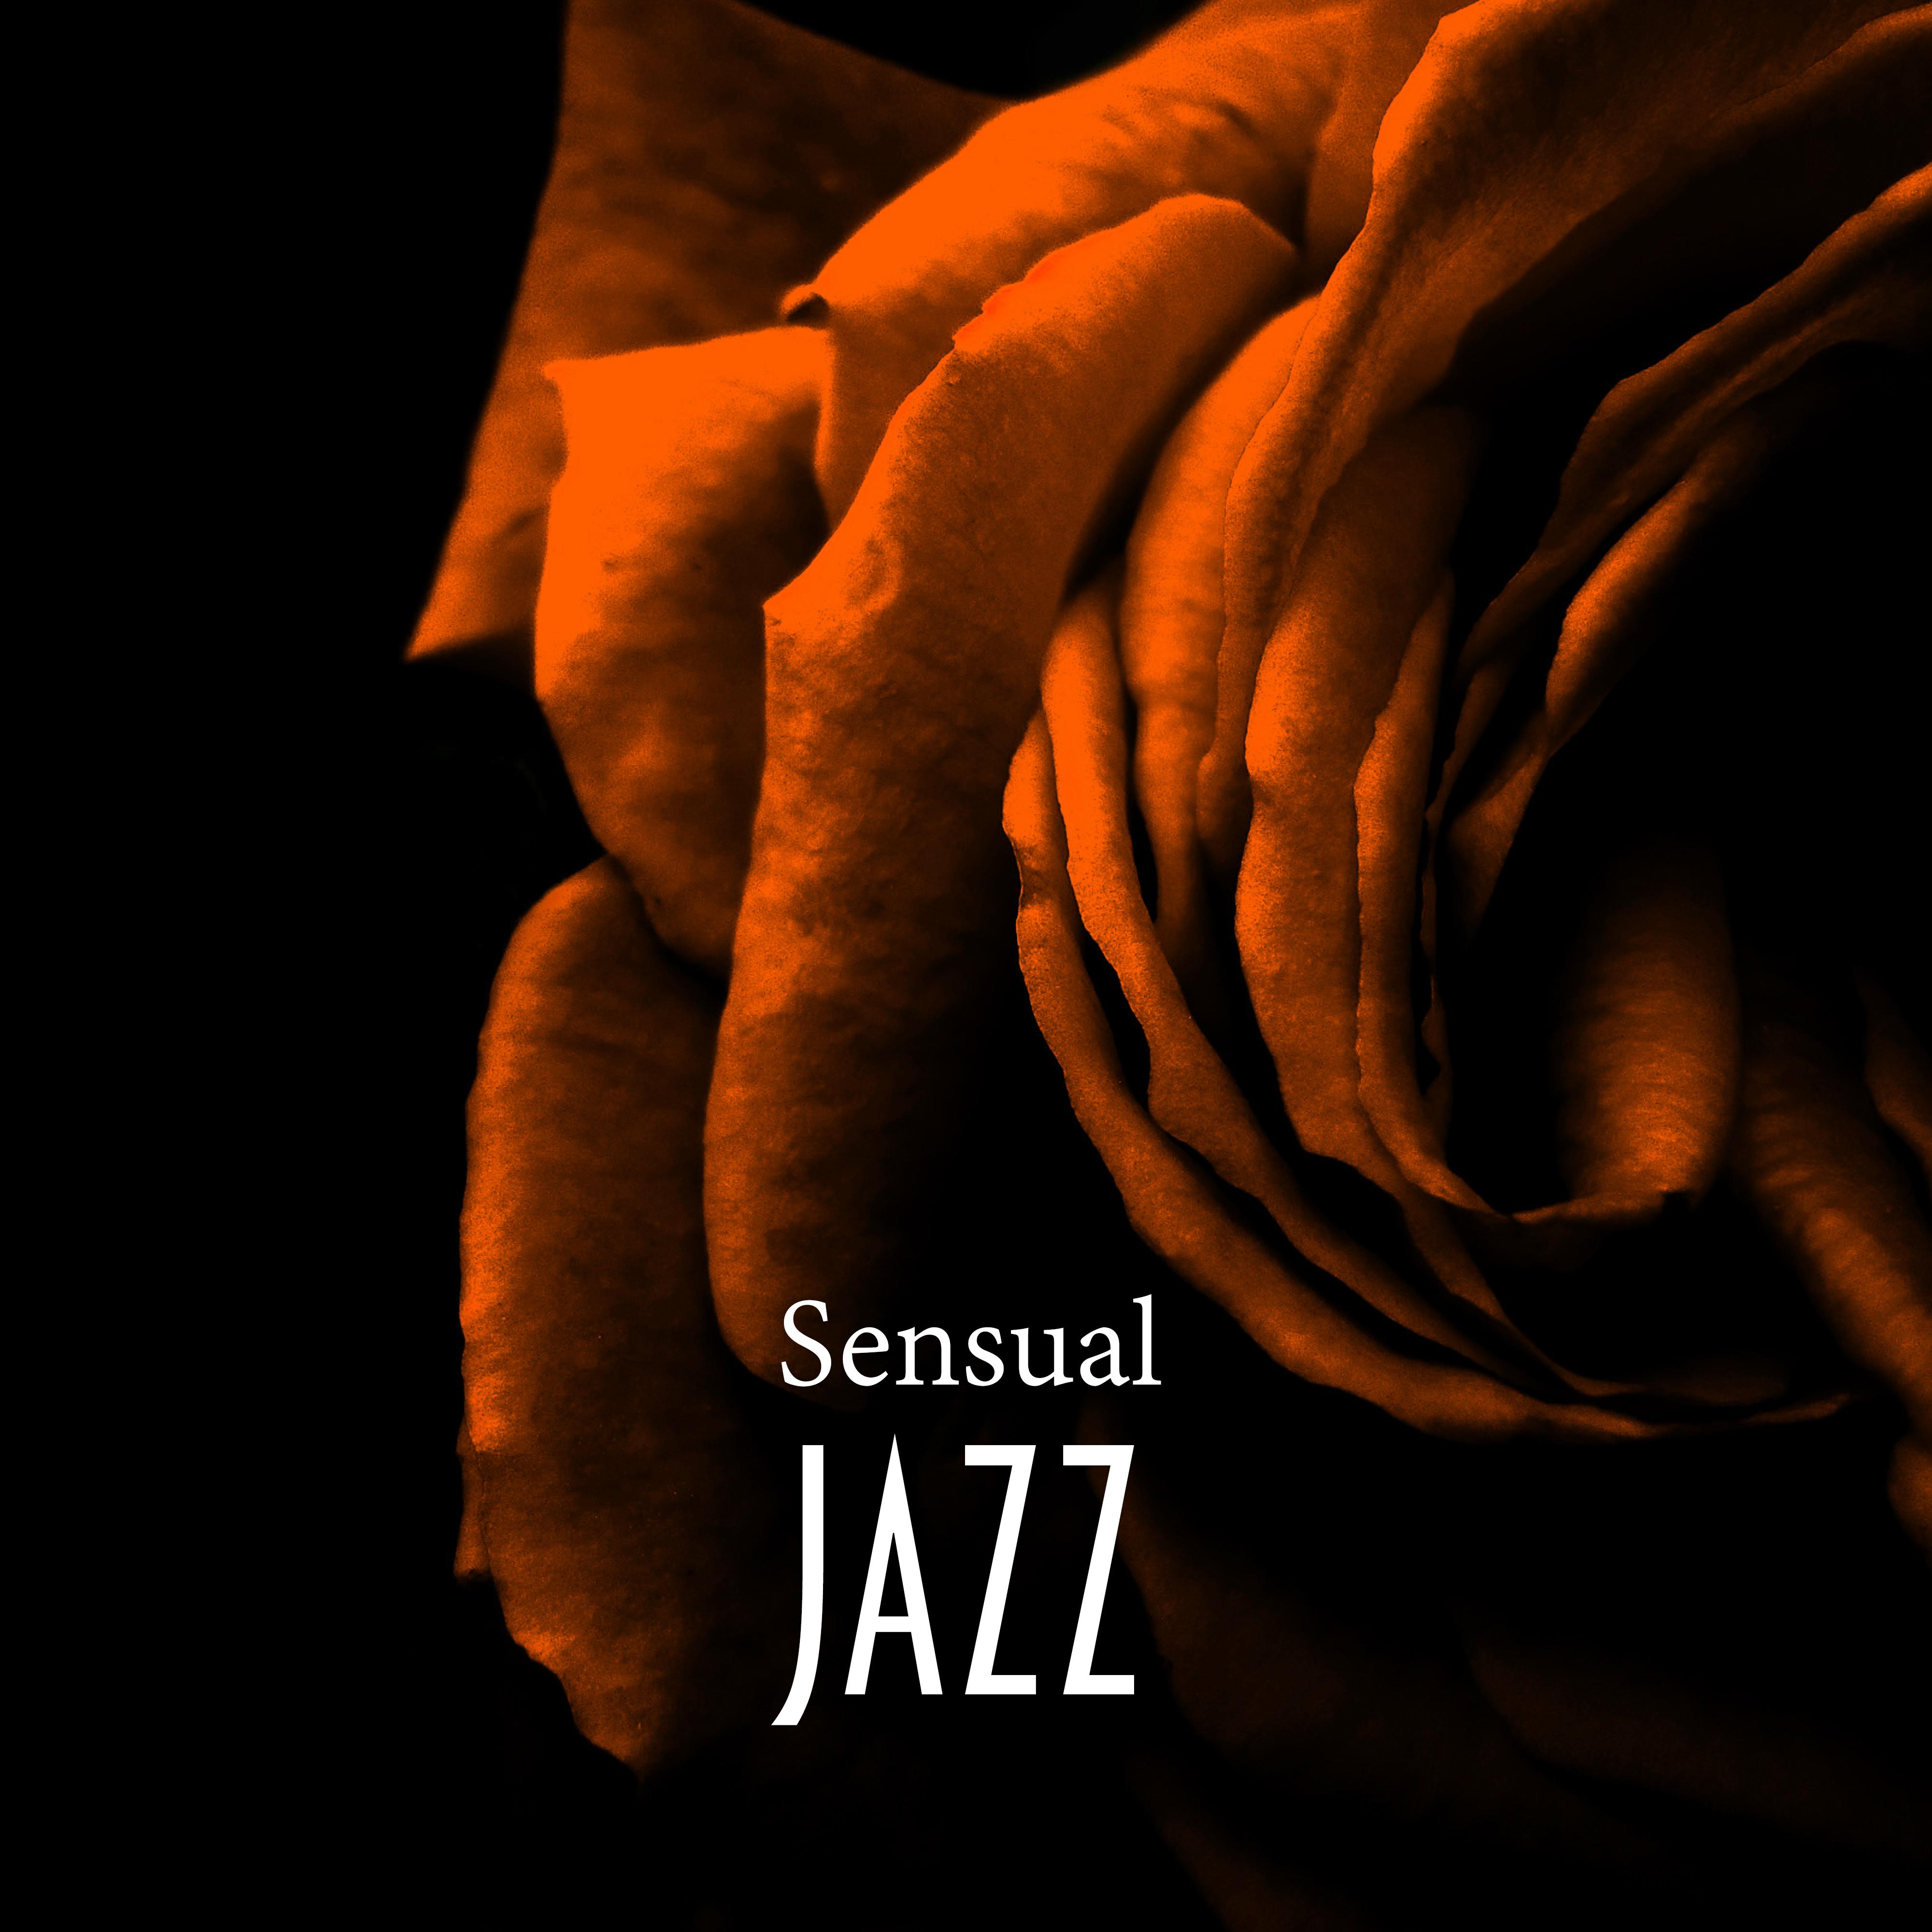 Sensual Jazz – Relaxation for Two, Erotic Lounge, Romantic Night, Dinner by Candlelight, Sensual Dance, Deep Massage, Erotic Jazz Music